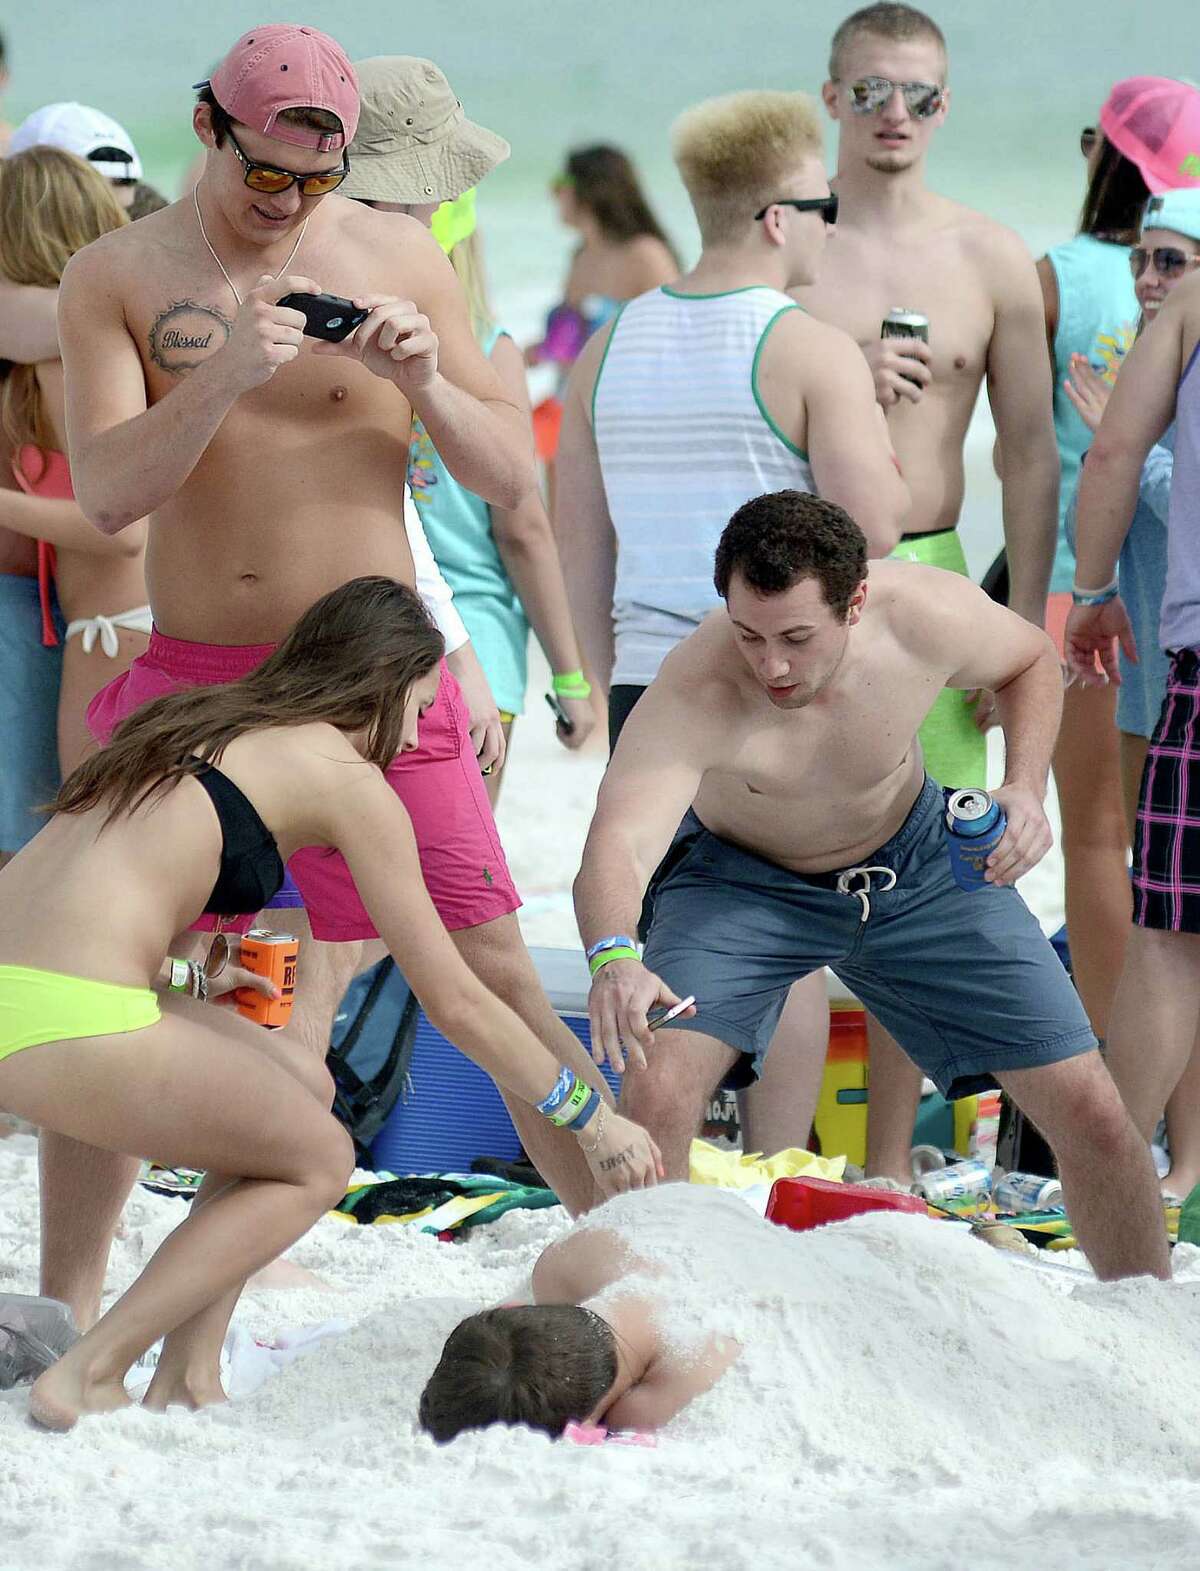 Spring breakers photograph their friend sleeping on the beach on Tuesday, March 18, 2014 in Destin, Fla.